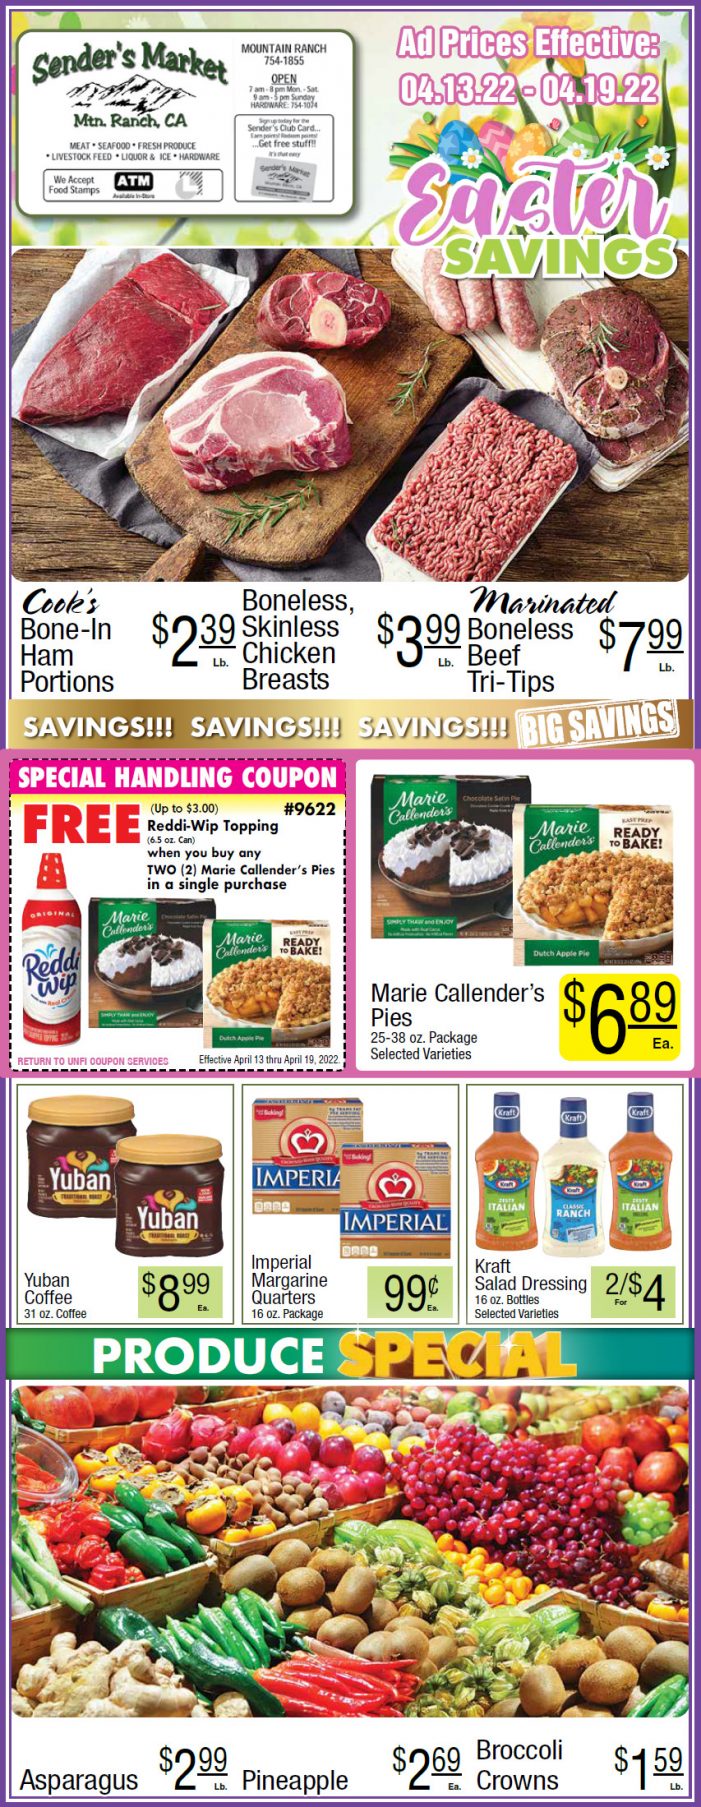 Sender’s Market’s Weekly Ad & Grocery Specials April 13th ~ April 19th! Shop Local & Save!